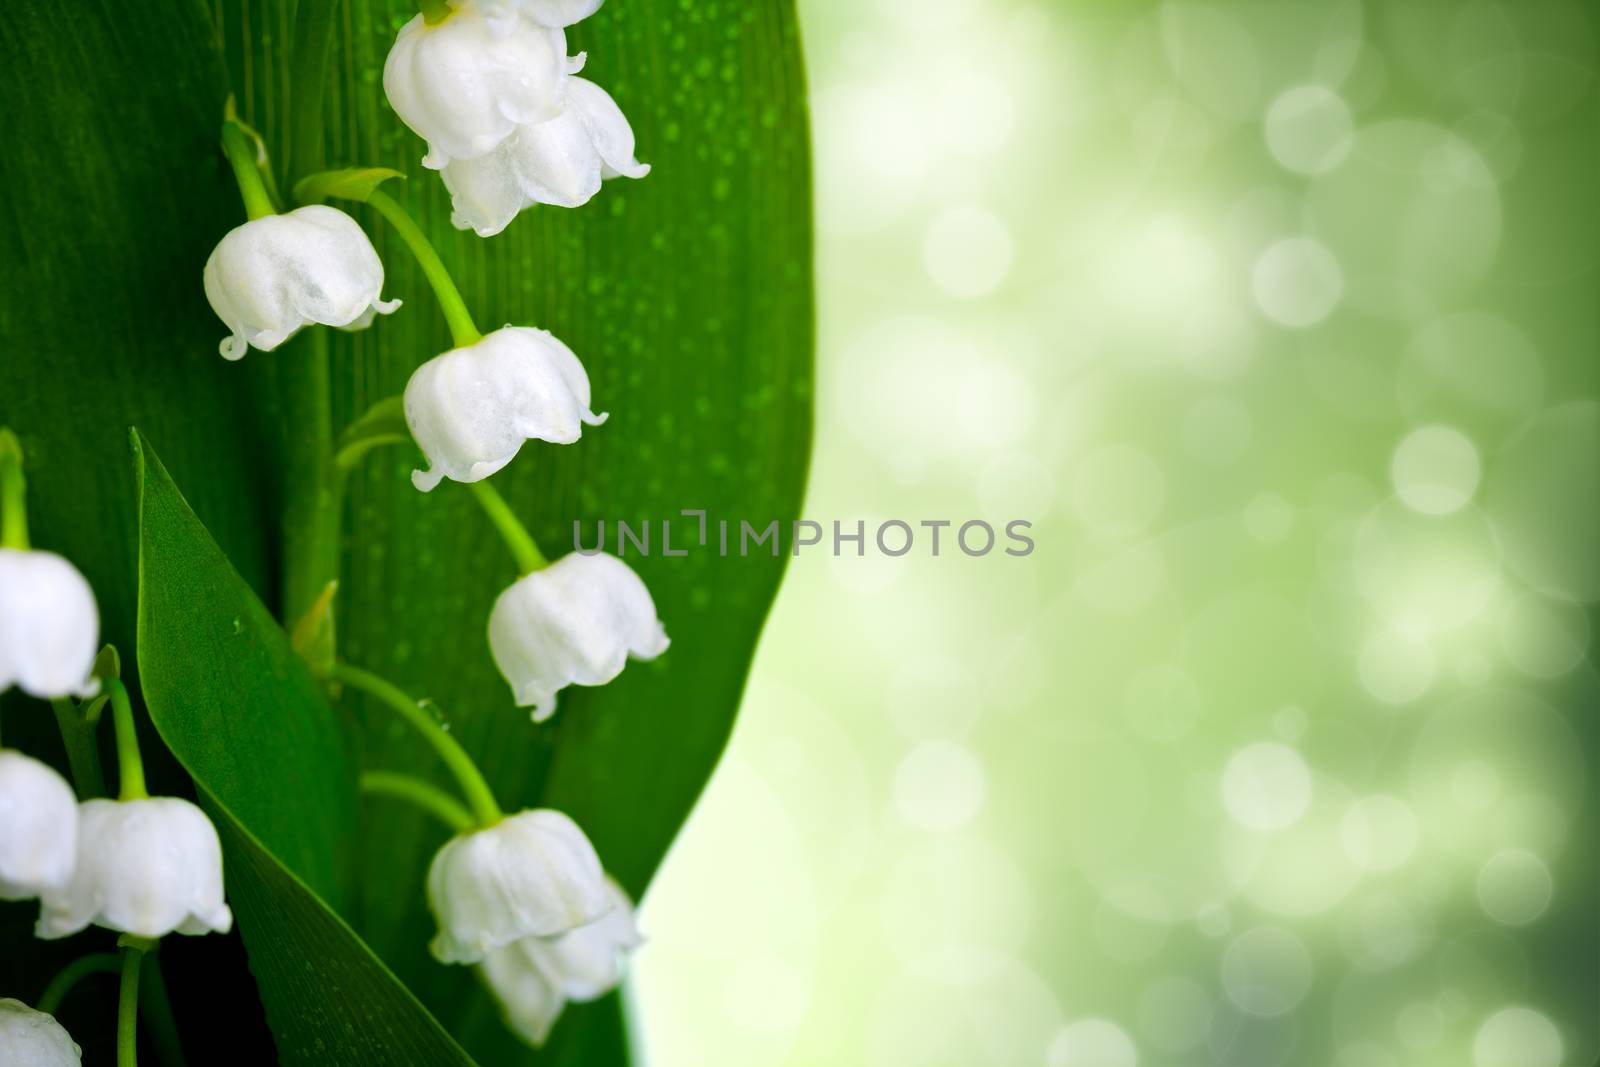 Lily-of-the-valley by bozena_fulawka